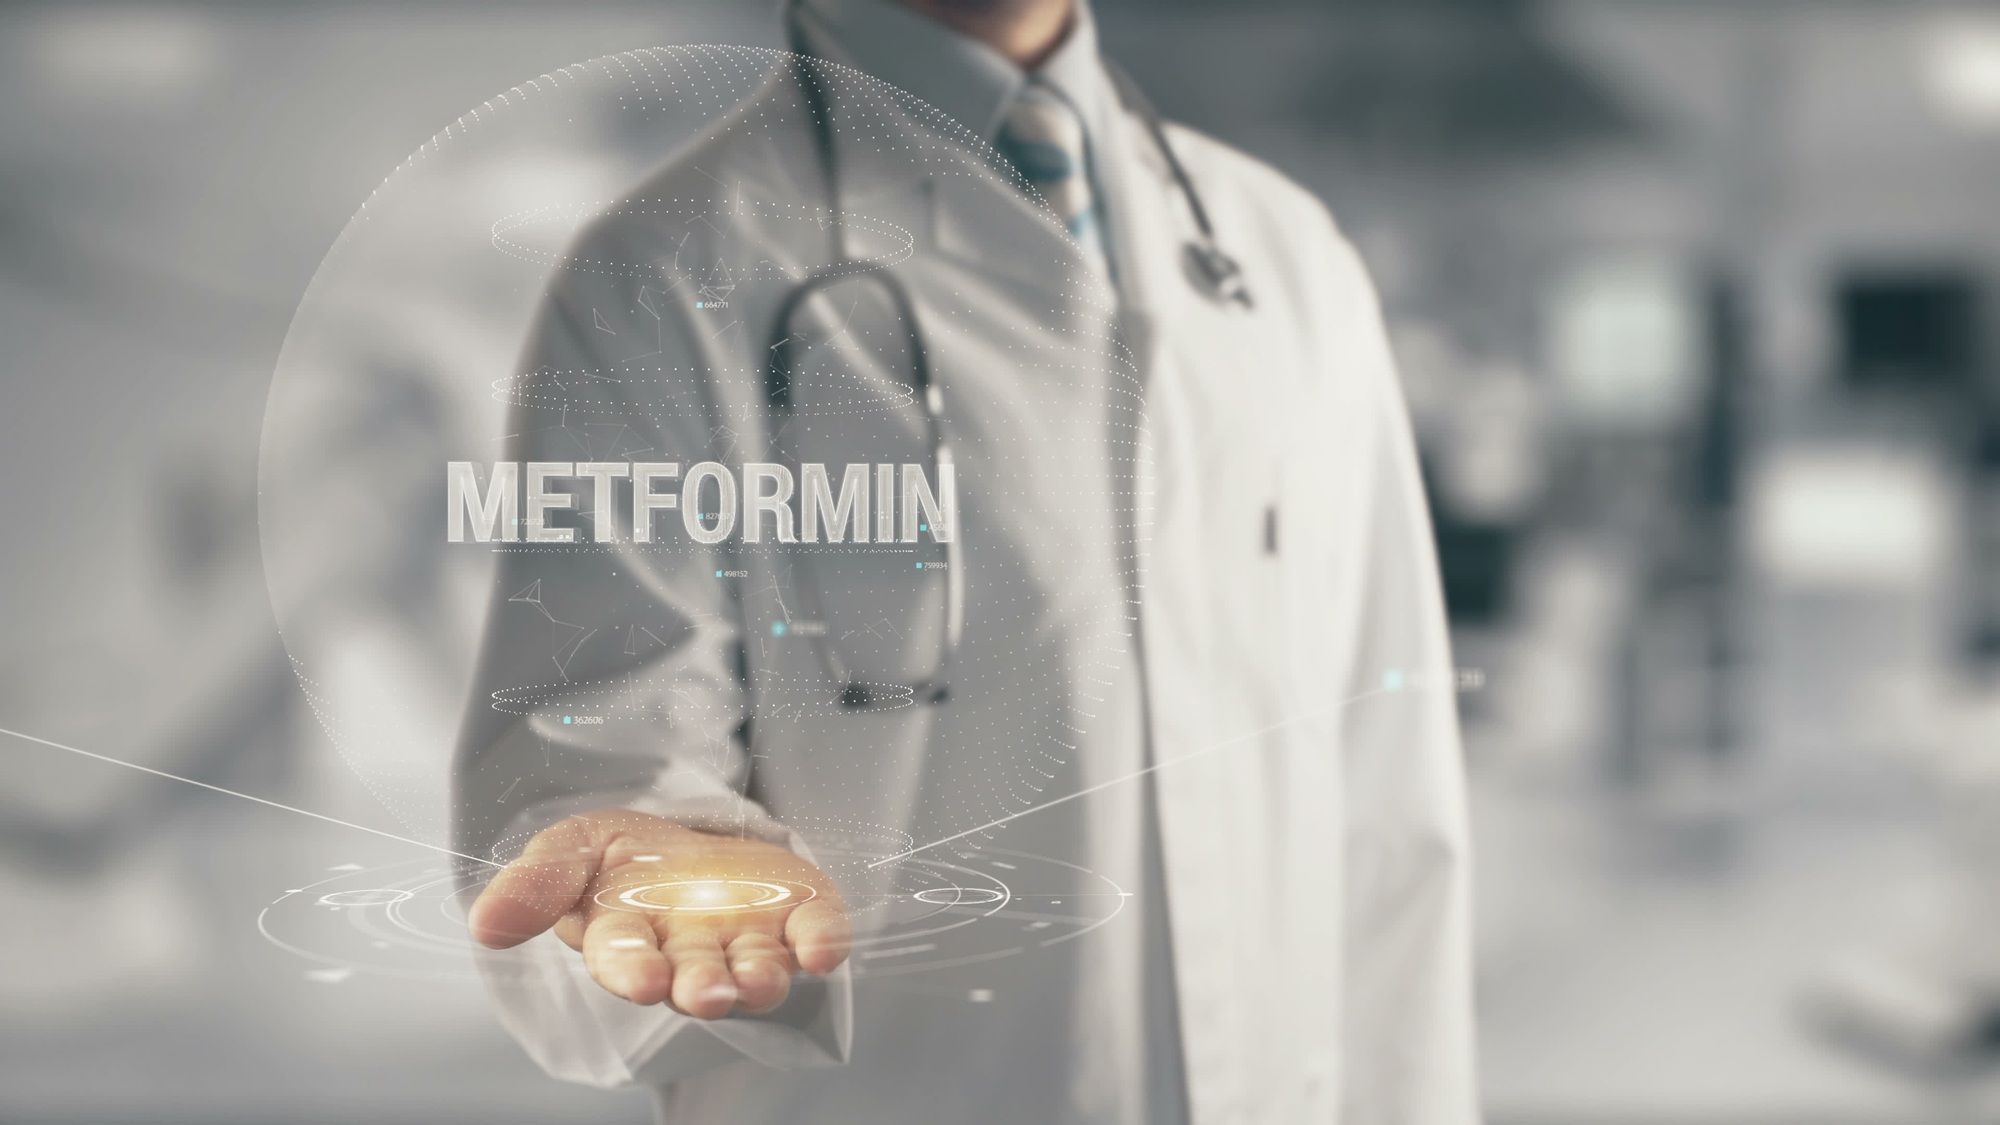 Metformin Class Action Lawsuit Filed Over Cancer Risks Top Class